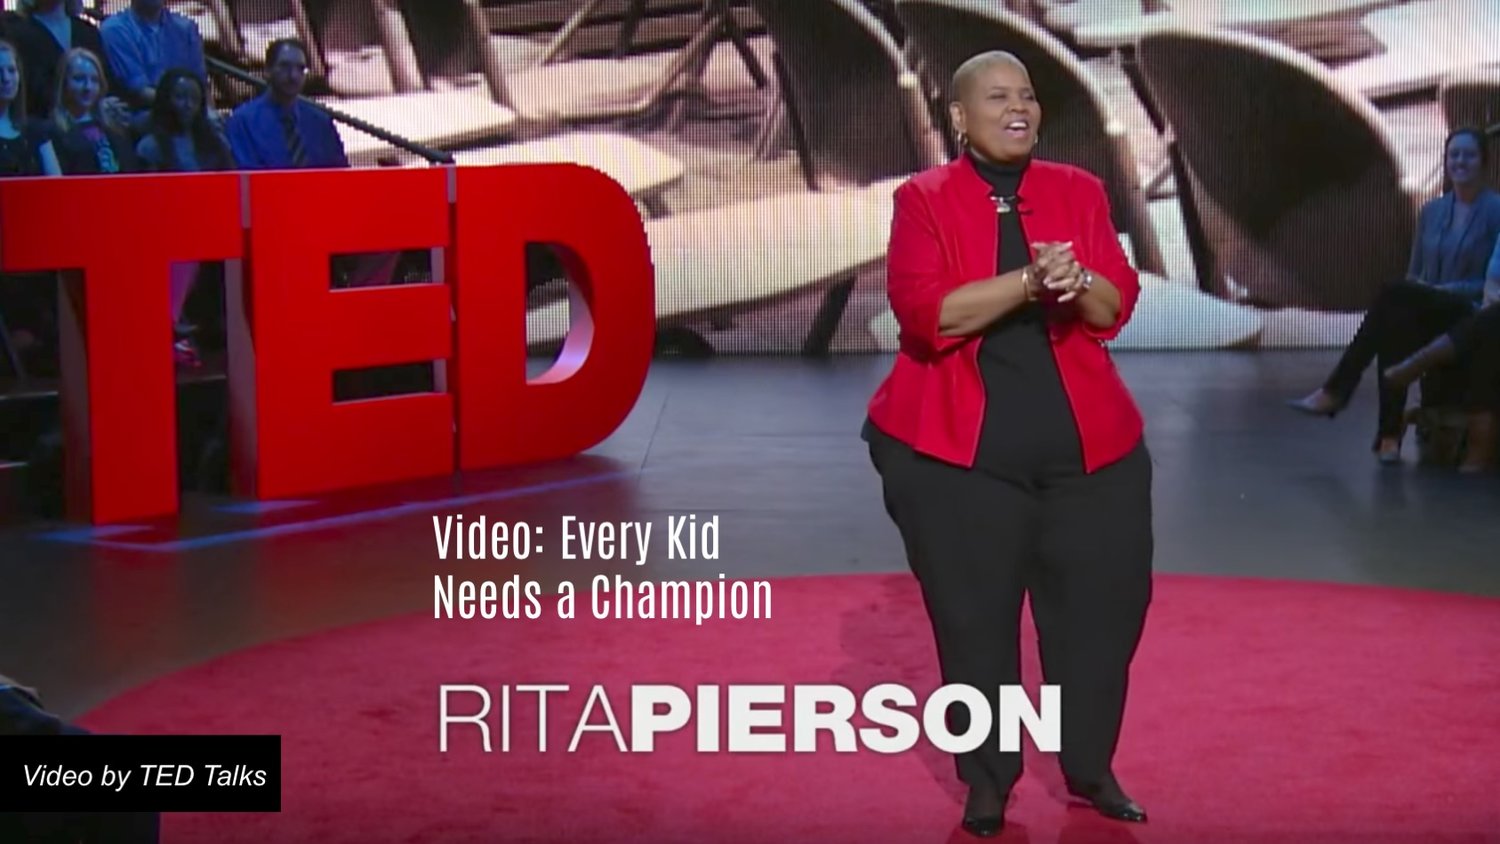 TED Talk: Every Child Deserves A Champion